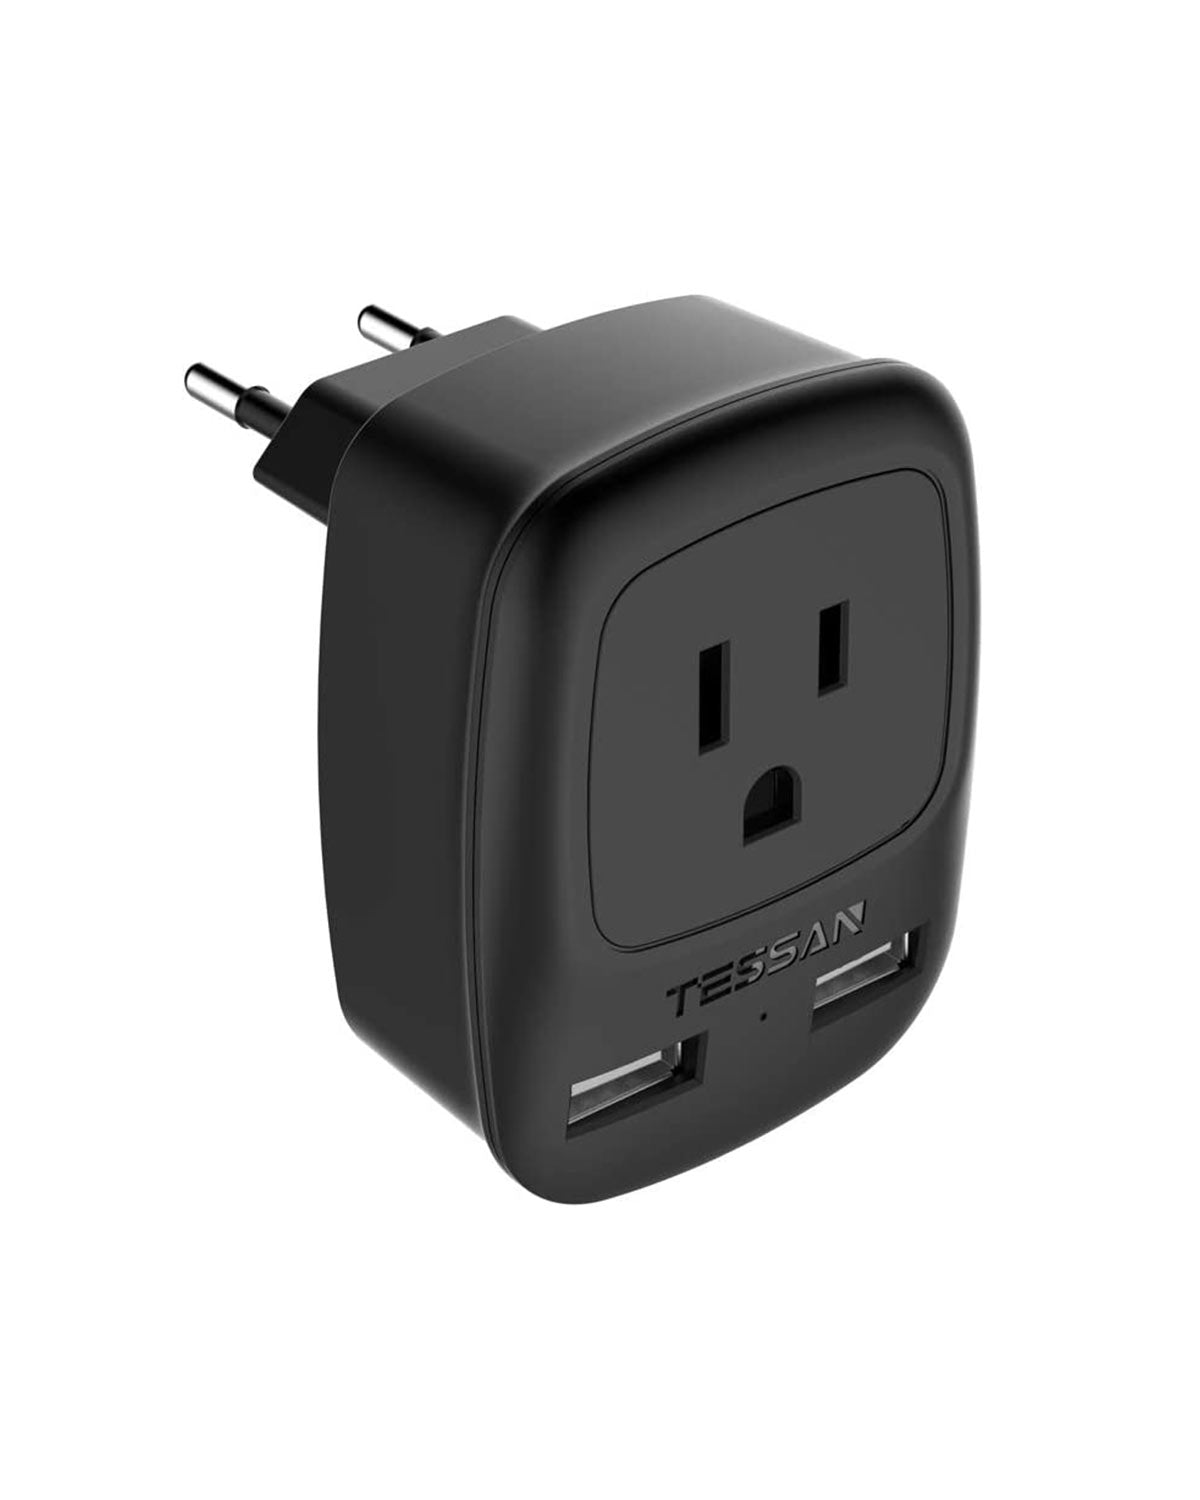 TESSAN European Travel Adapter with 1 outlet and 2 USB charging Ports